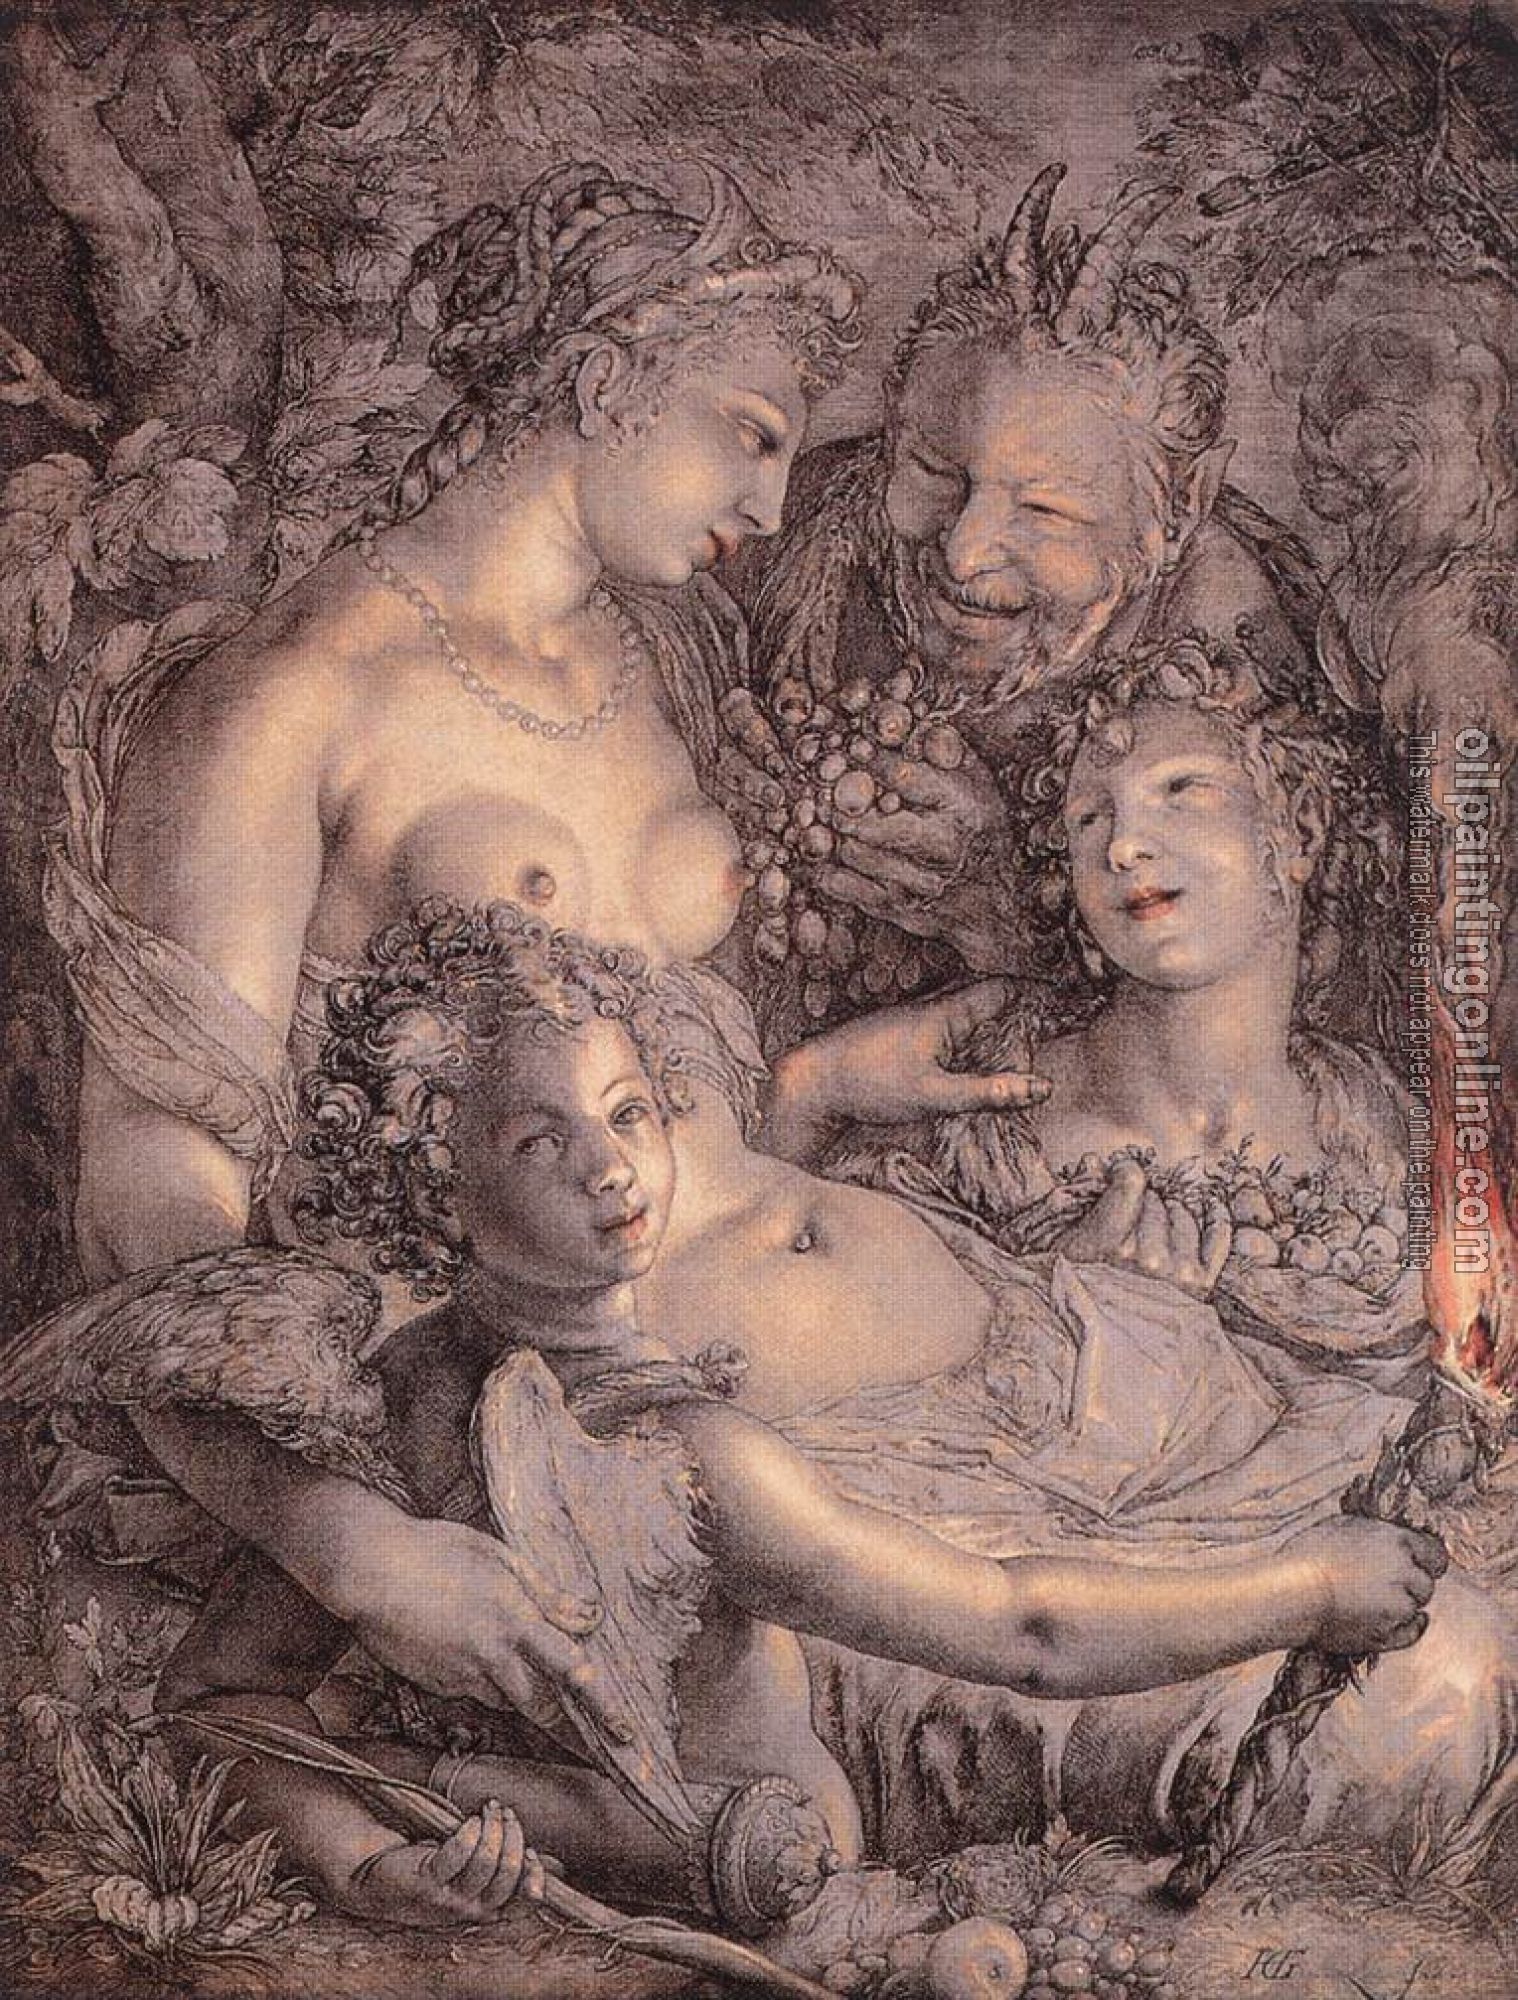 Goltzius, Hendrick - Without Ceres and Bacchus, Venus would Freeze